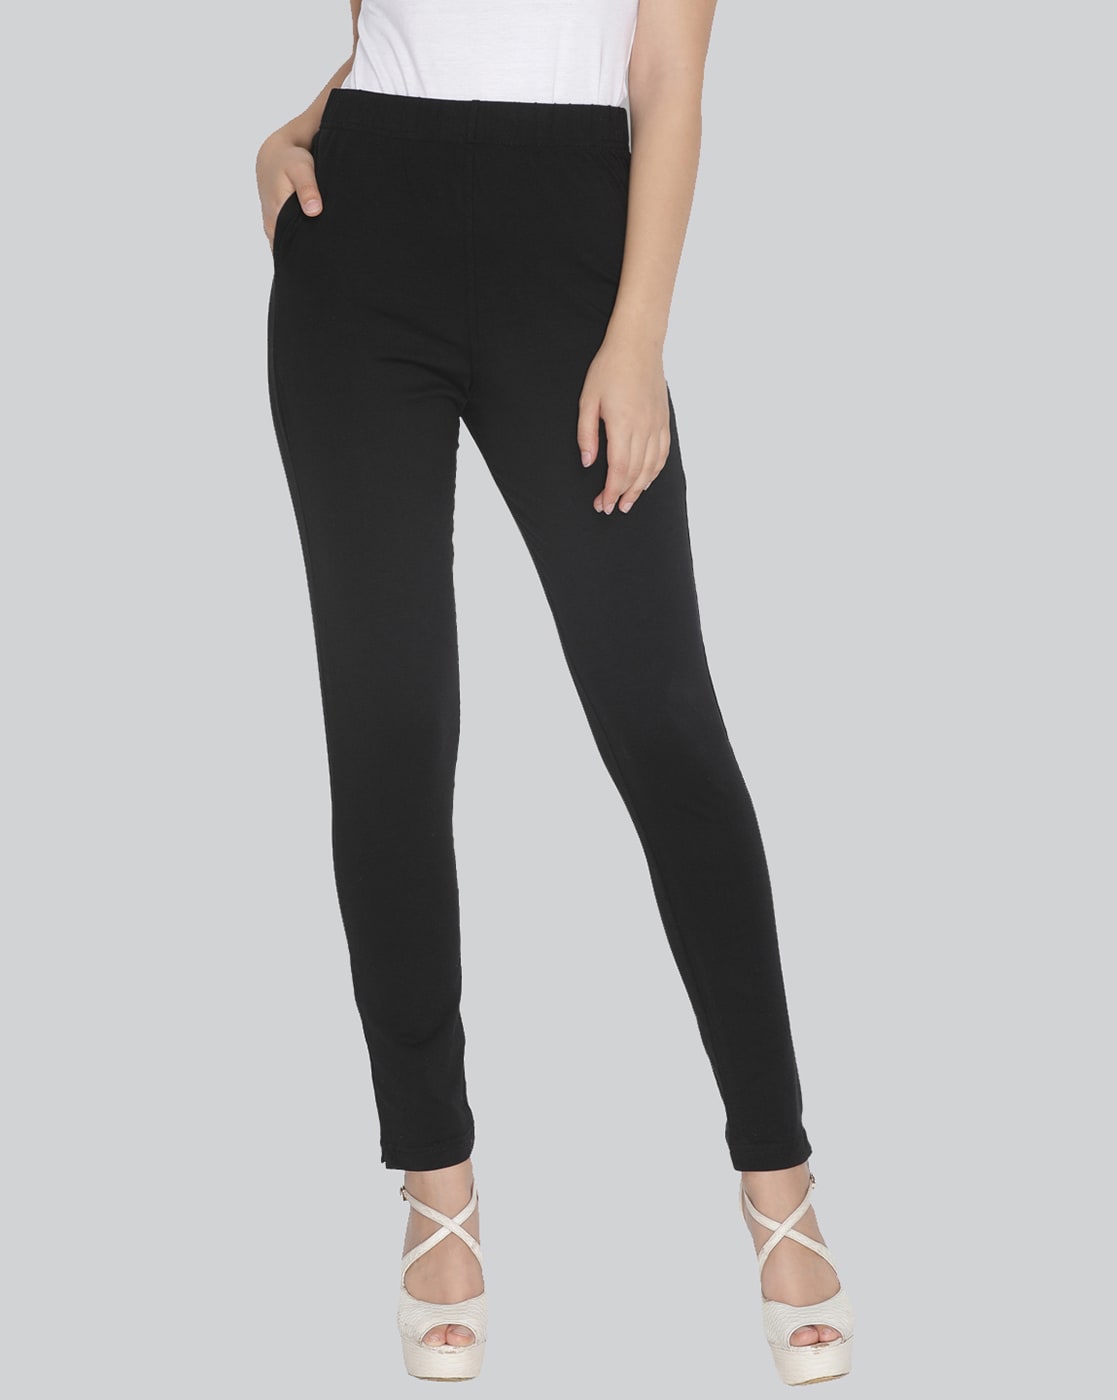 Mid Waist Lux Lyra Ladies Black Ankle Length Legging, Casual Wear, Skin Fit  at Rs 245 in Ahmedabad